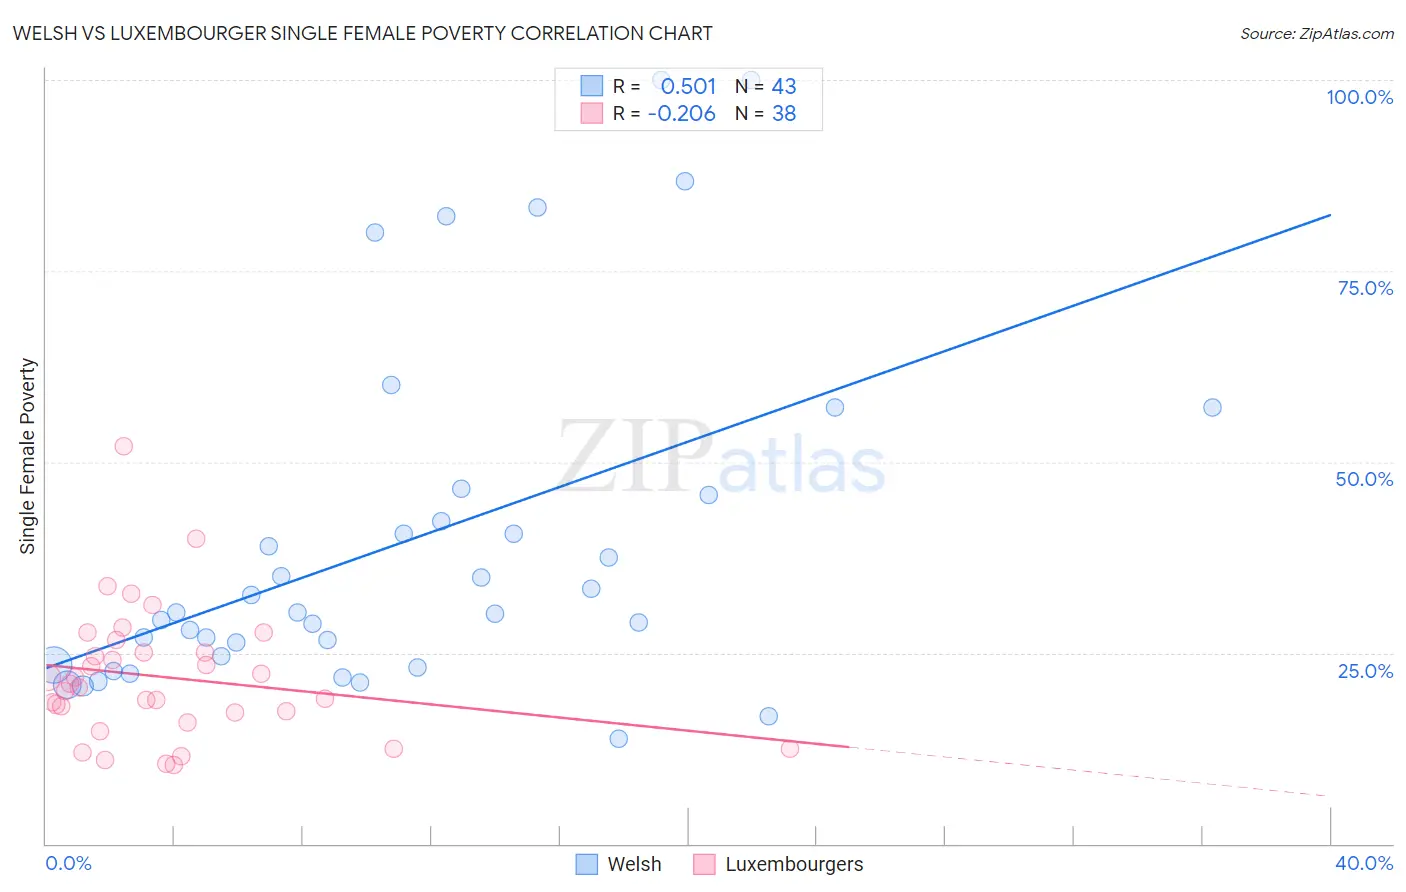 Welsh vs Luxembourger Single Female Poverty